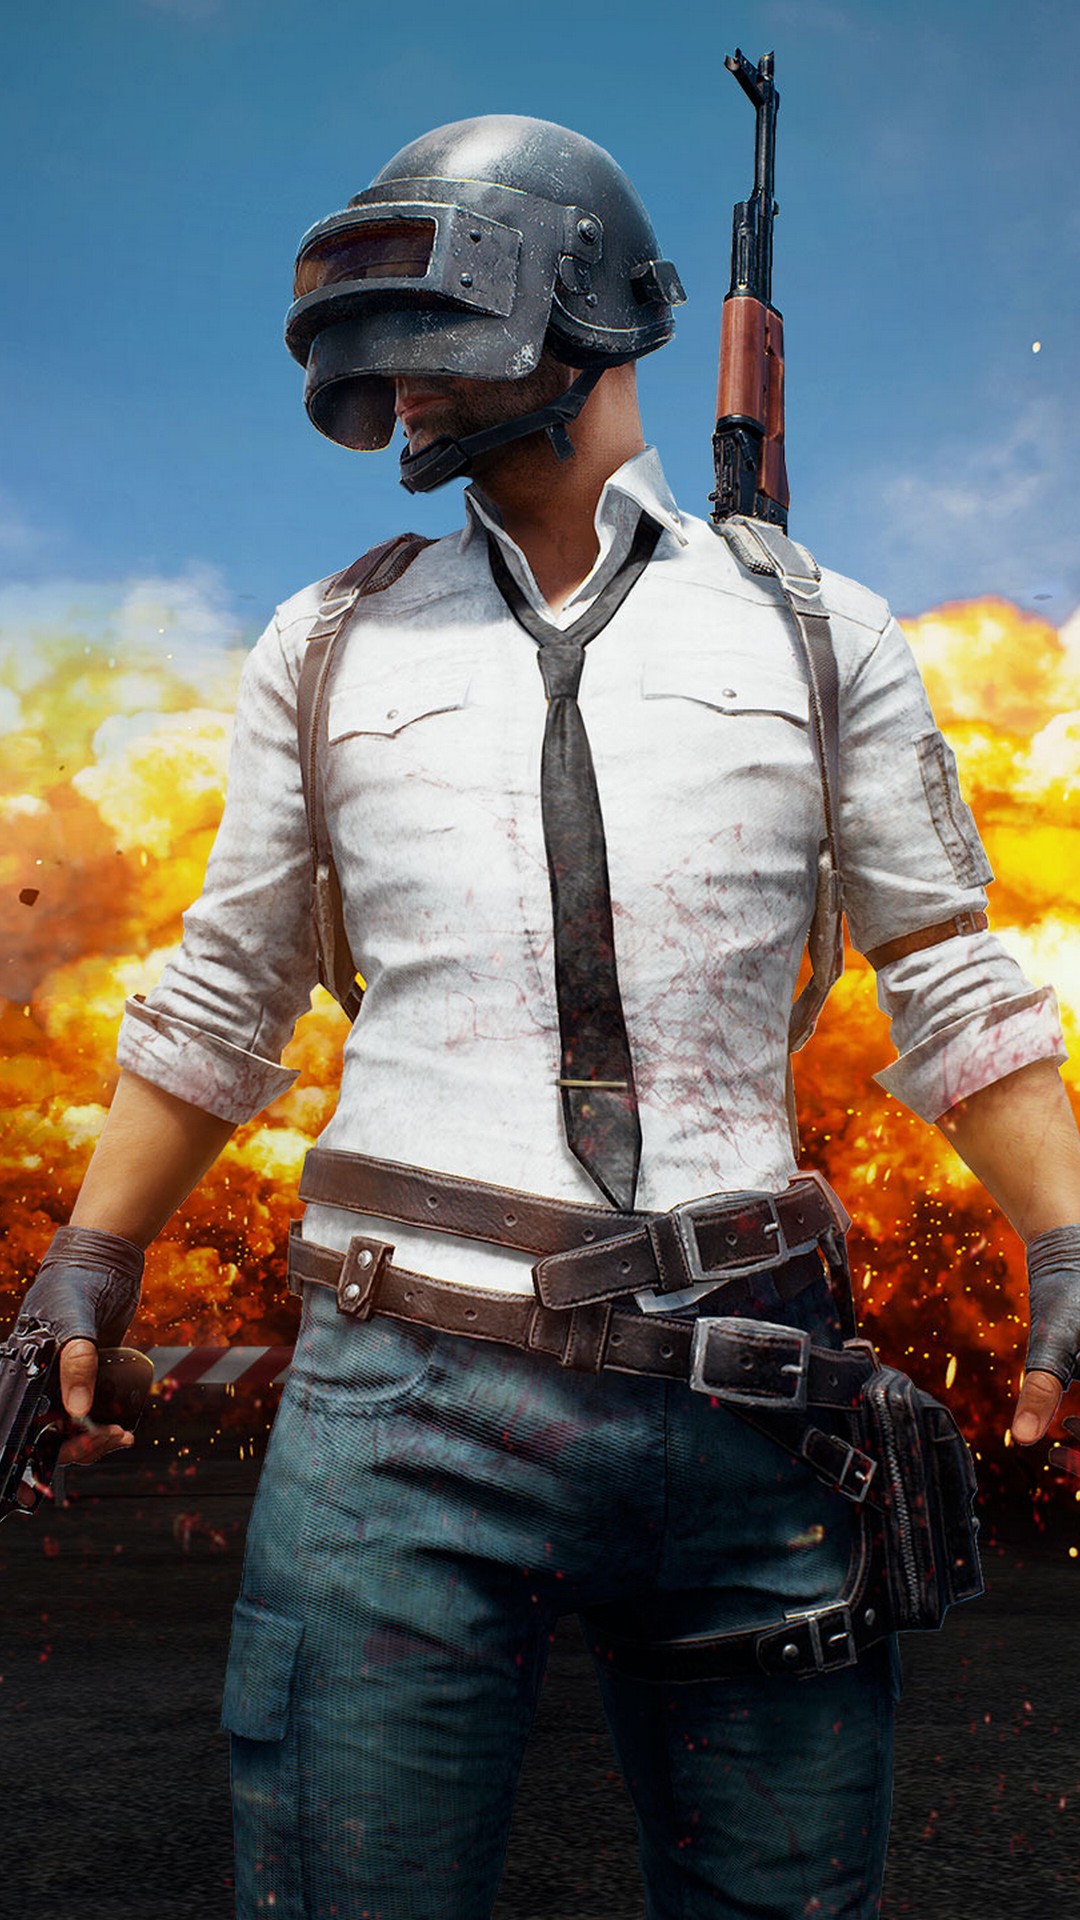 iPhone Wallpaper HD PUBG Mobile with resolution 1080X1920 pixel. You can use this wallpaper as background for your desktop Computer Screensavers, Android or iPhone smartphones